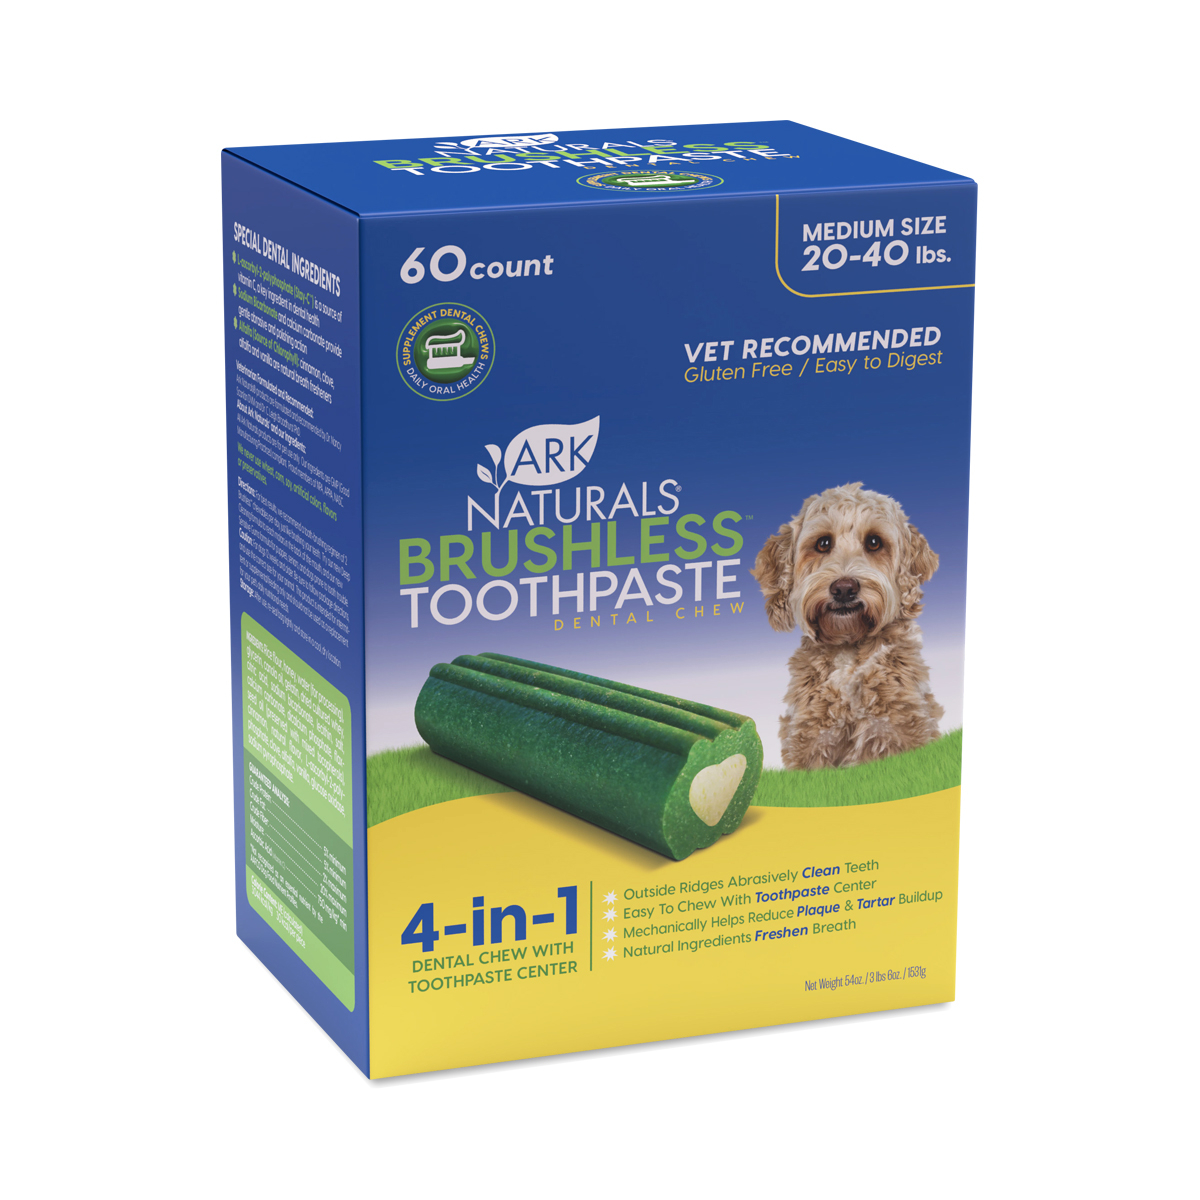 Ark Naturals Brushless Toothpaste Dental Chew, Medium 20-40 lbs 60 count